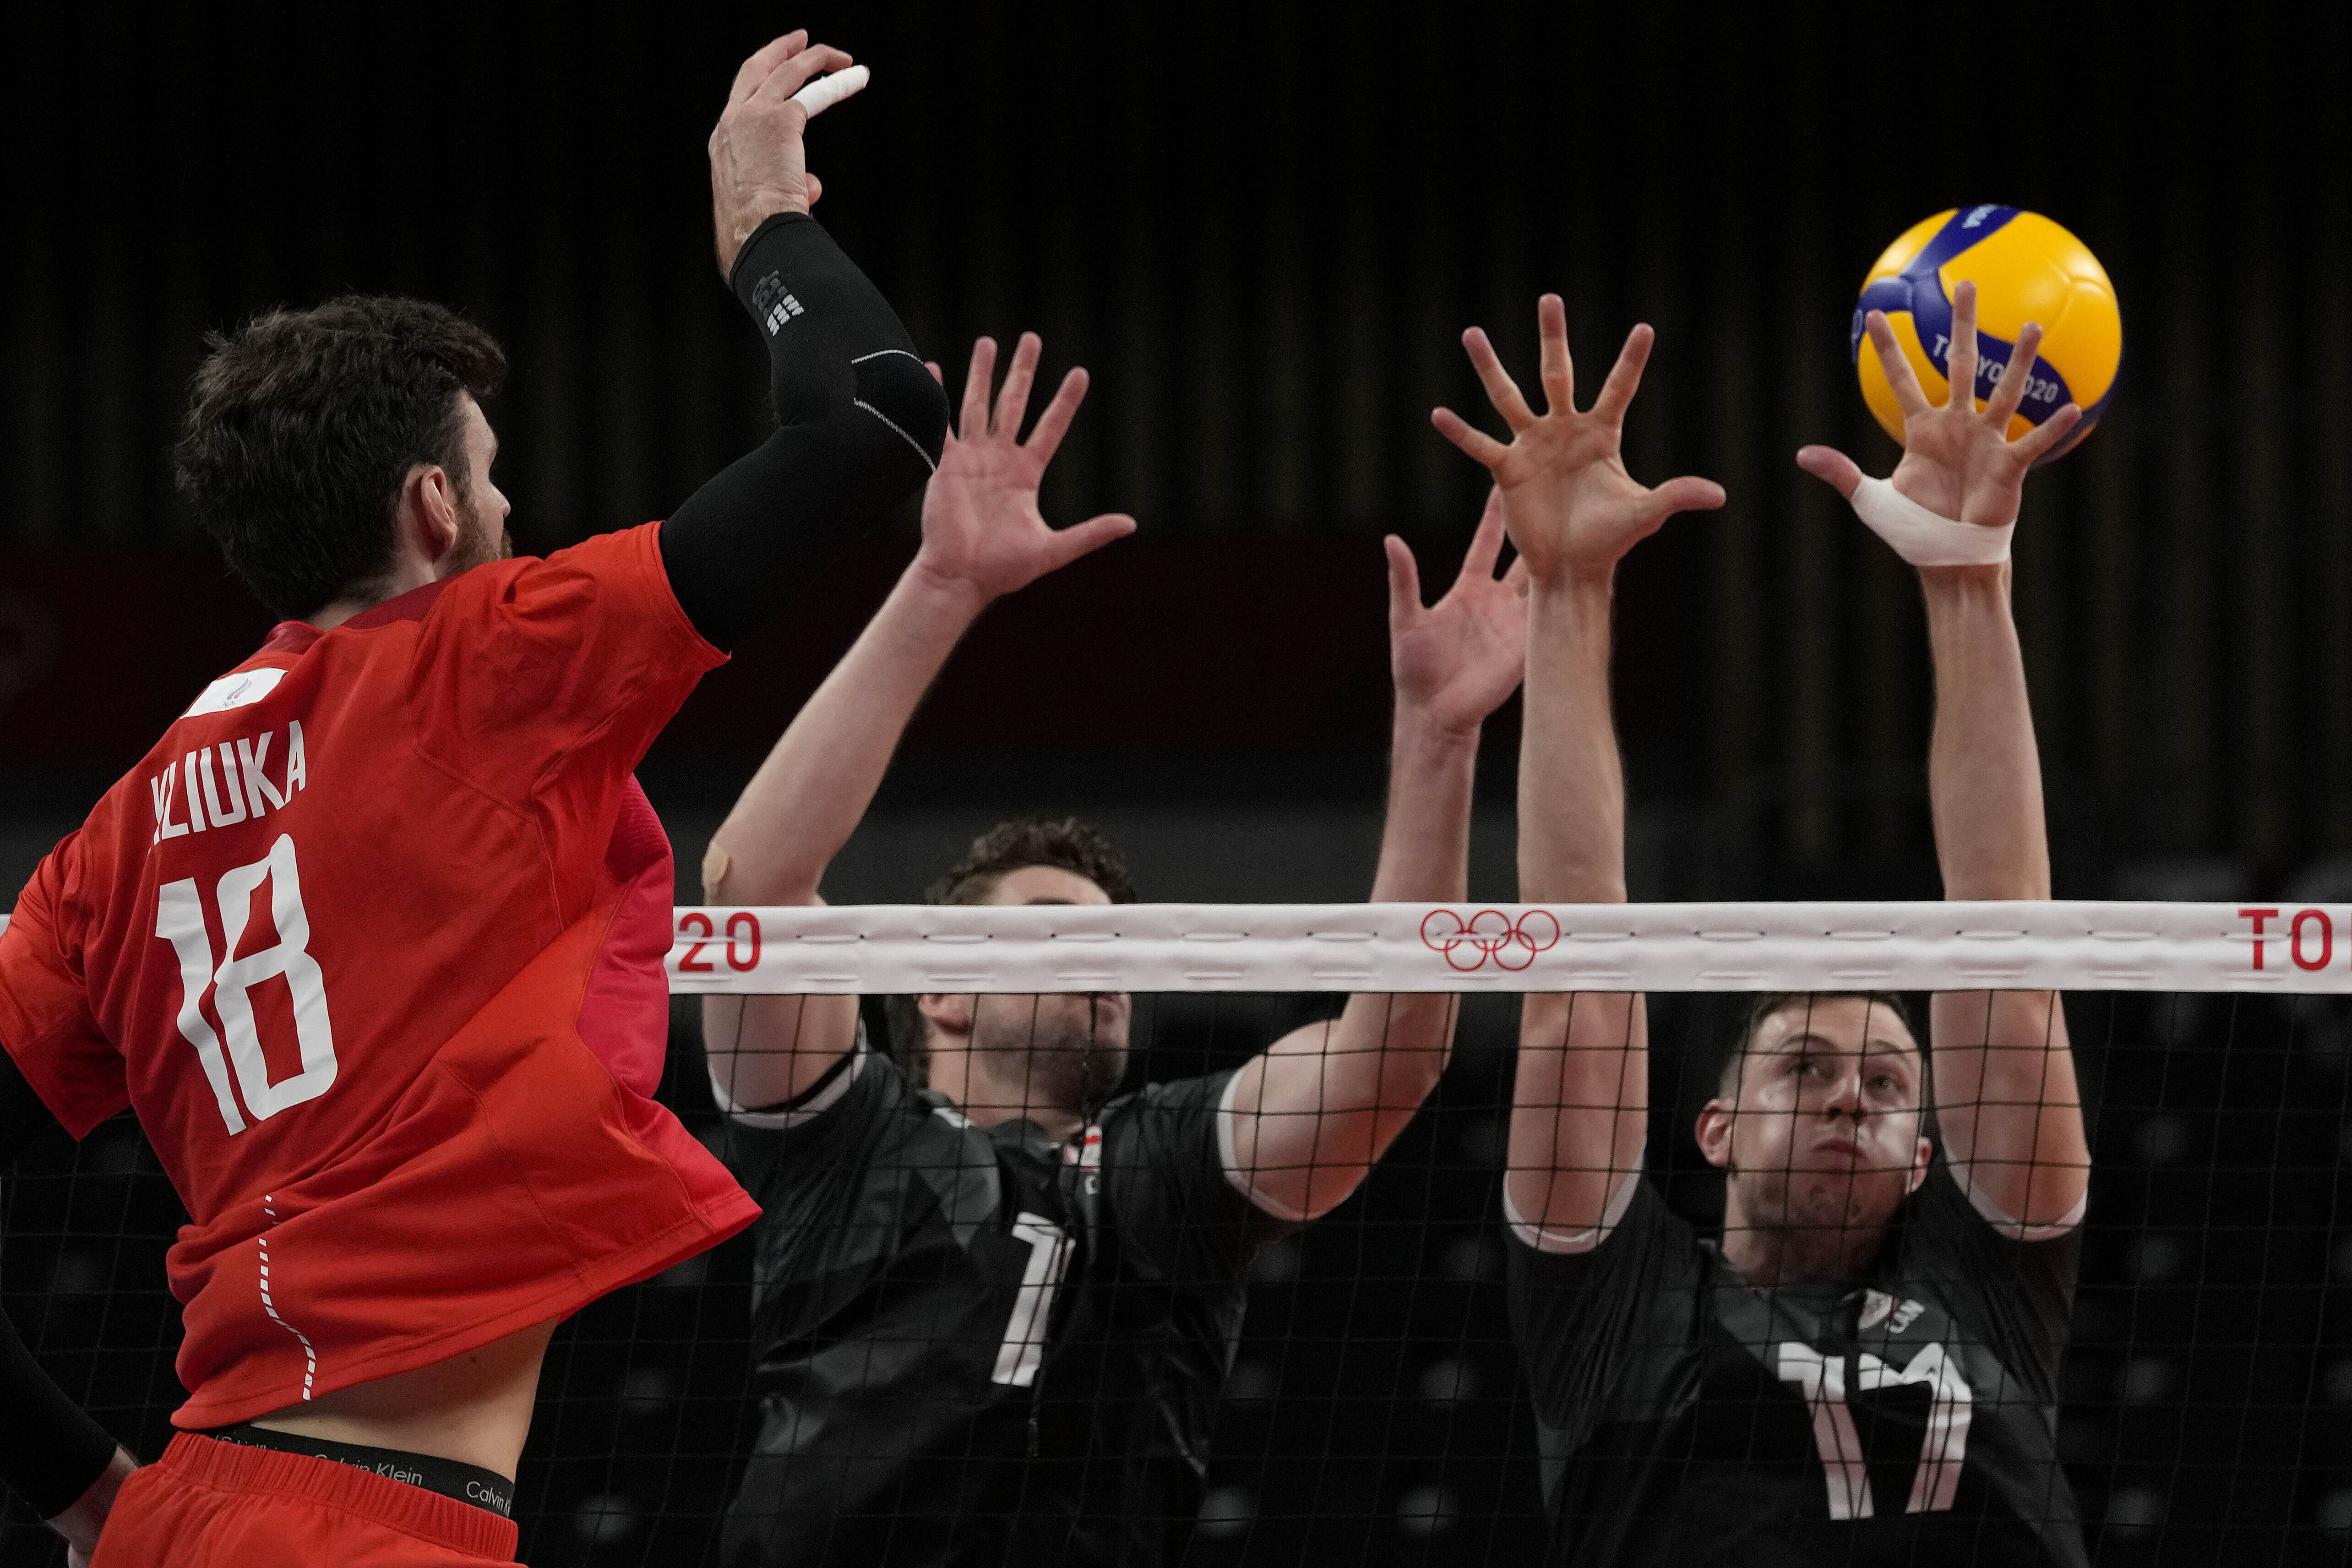 Team Canada fights hard but bows out in men's volleyball - Team Canada ...